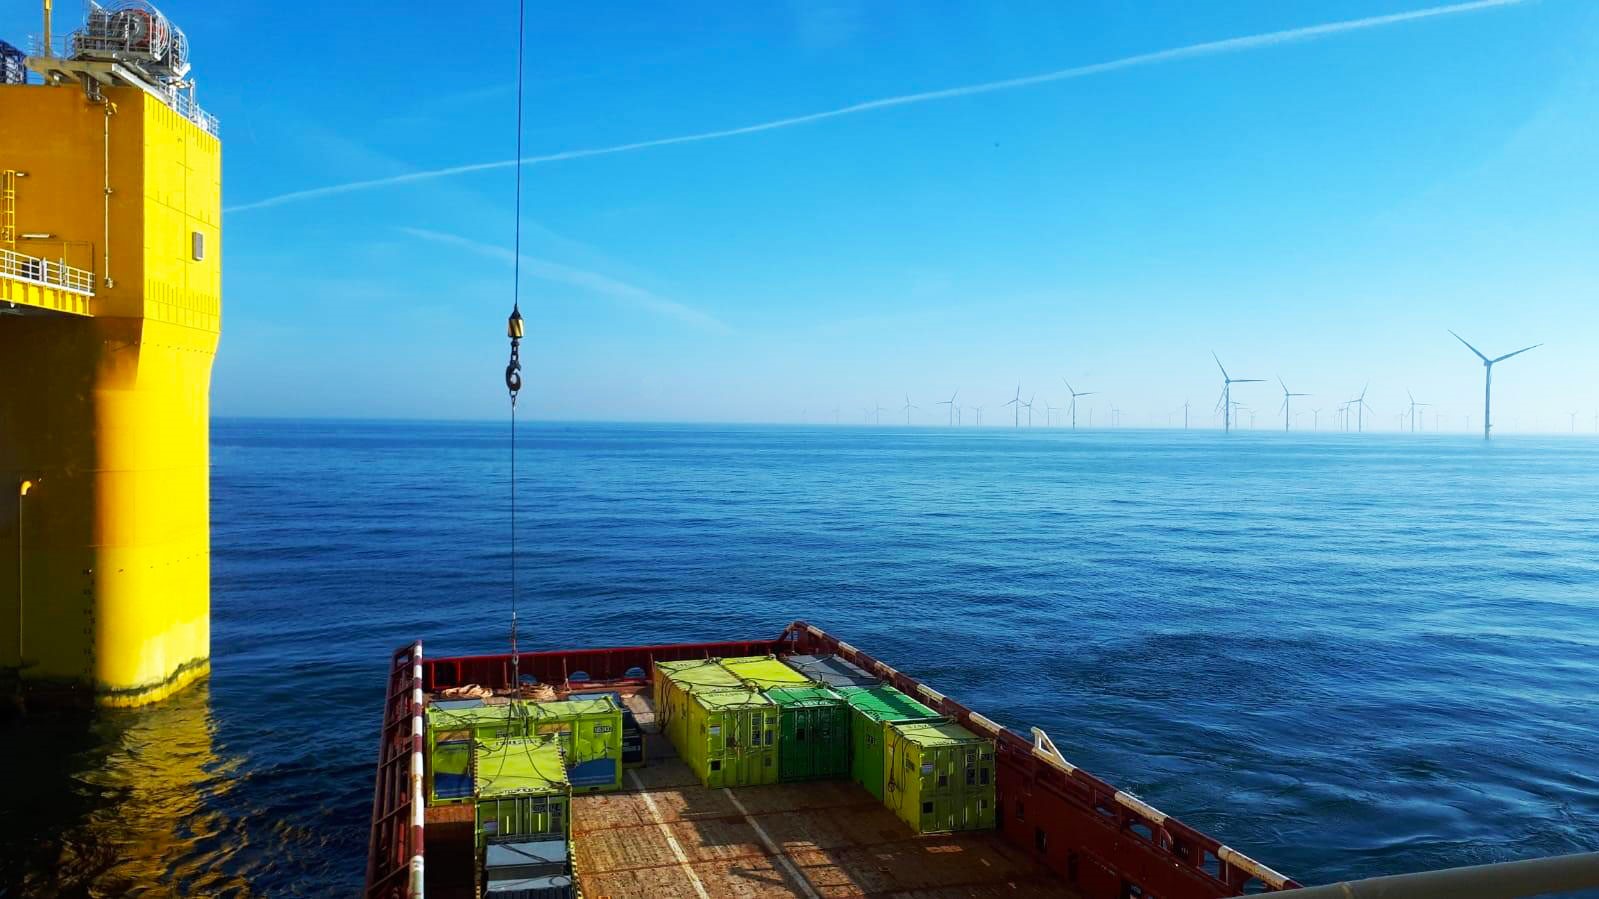 Cargostore containers with an offshore wind farm in the background